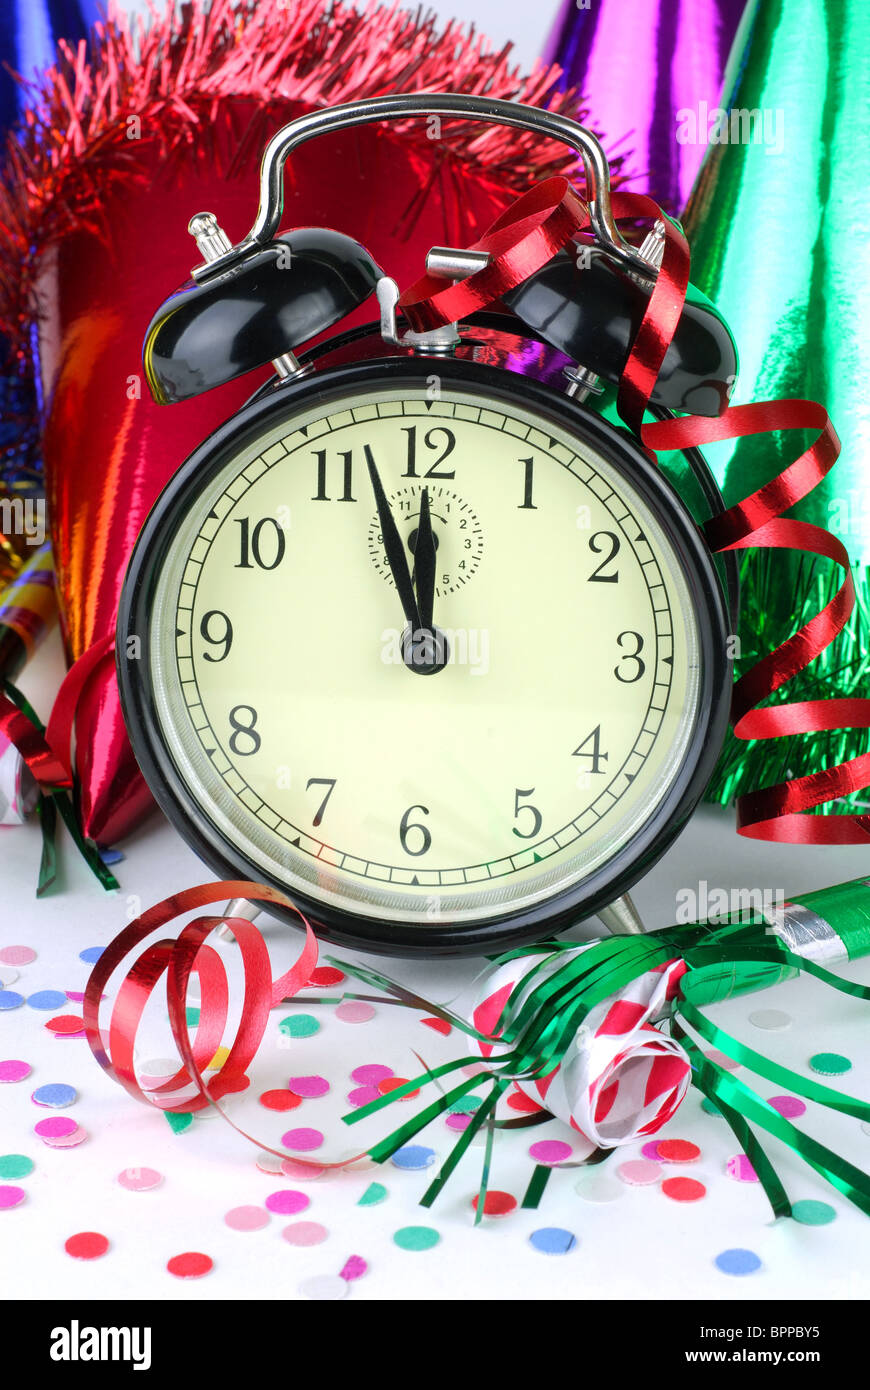 Clock Counting Down To The New Year At A Party Celebration Stock Photo